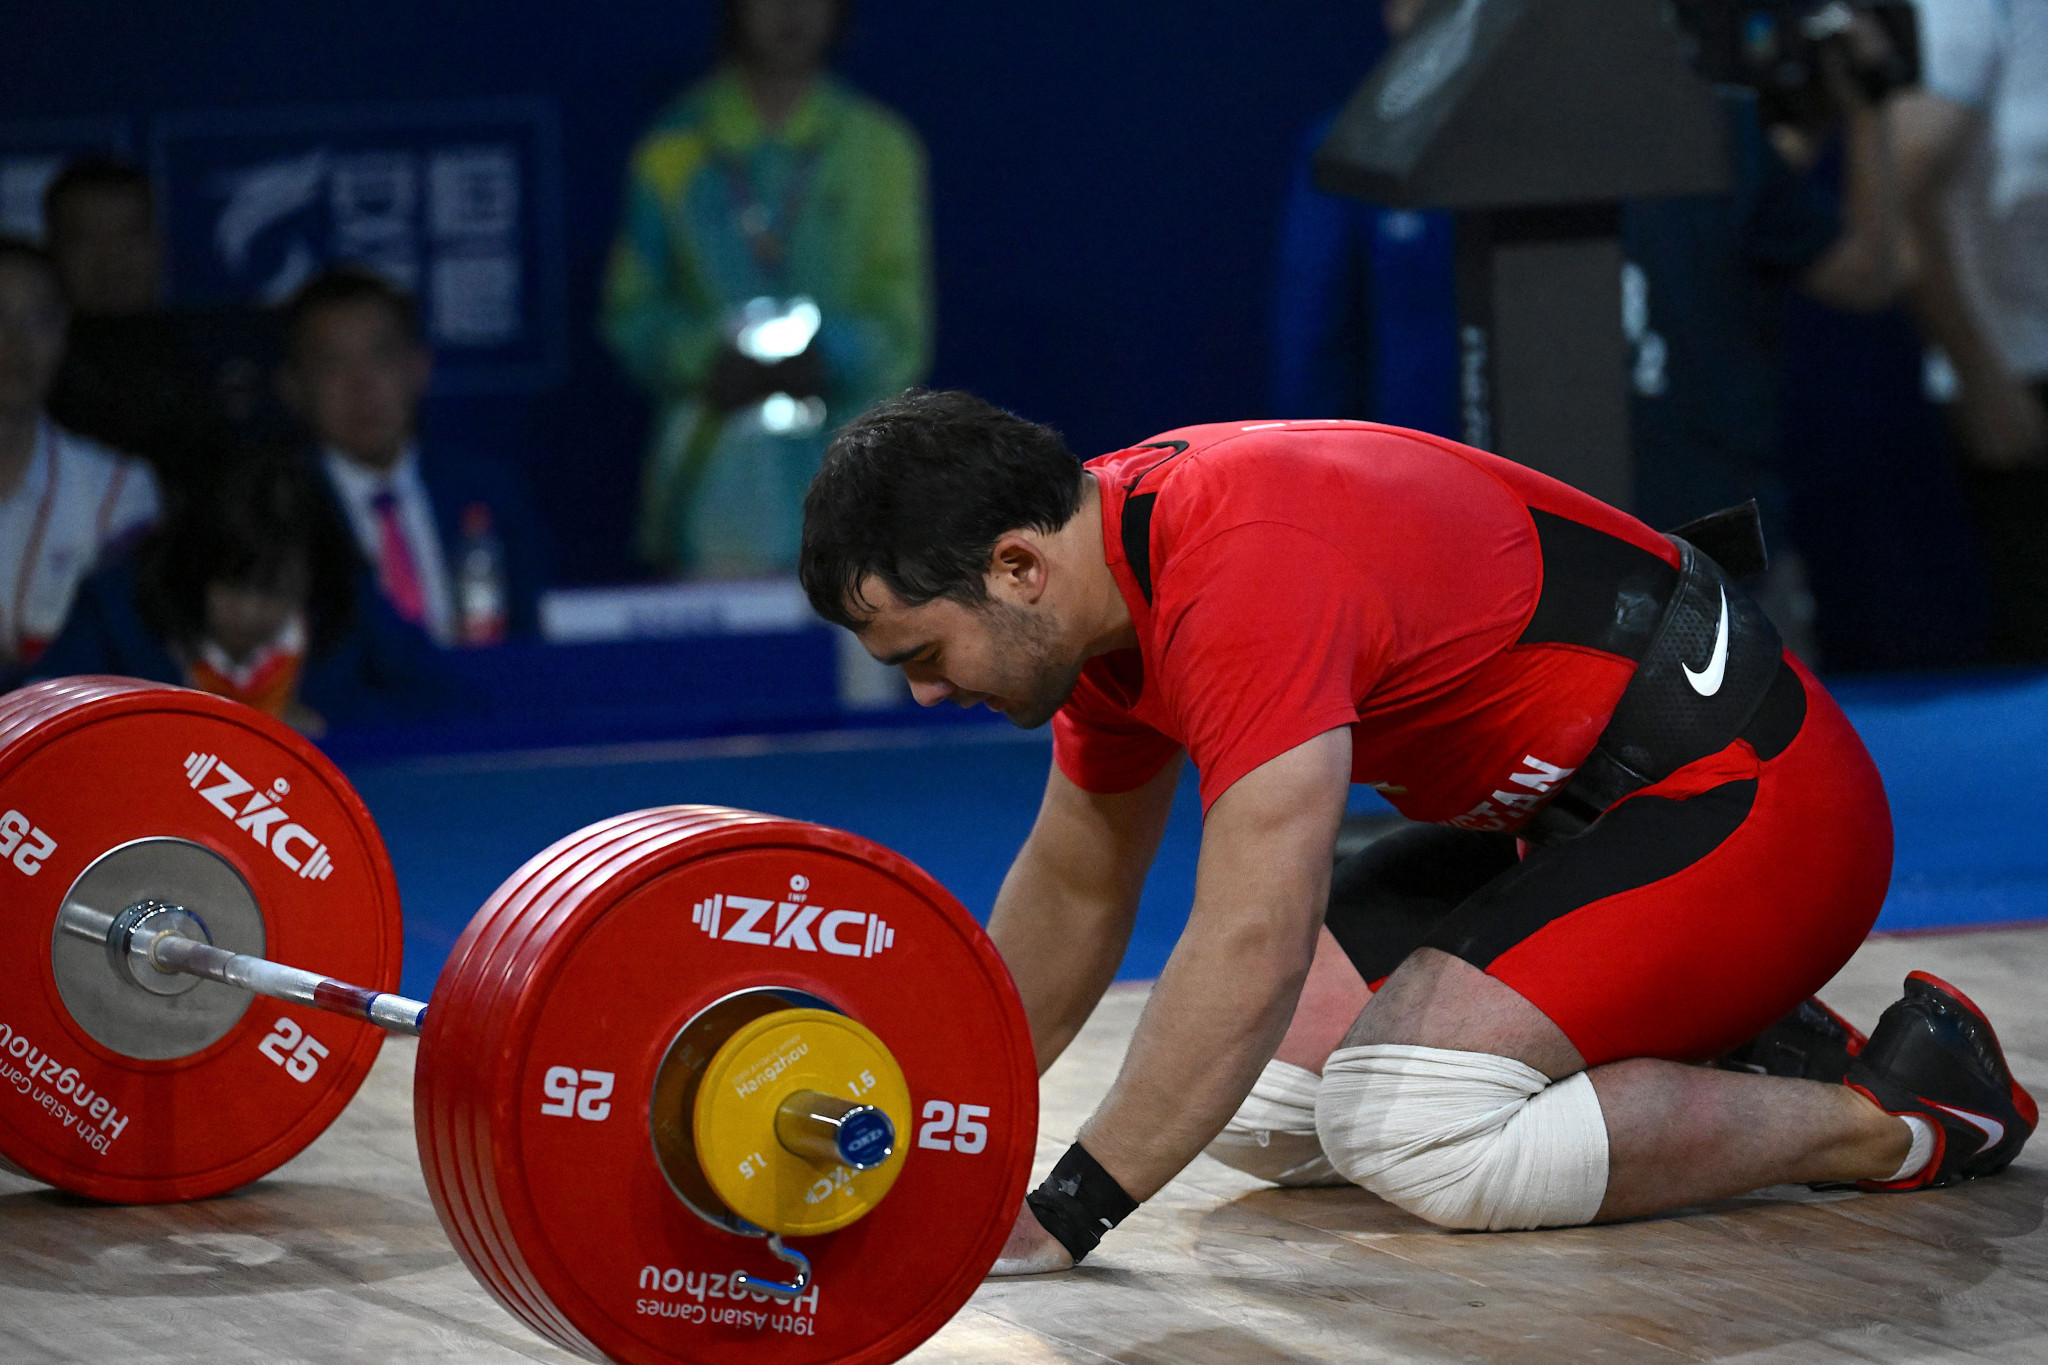 Uzbekistan's Akbar Djuraev lost out on the men's under-109kg weightlifting gold medal by 1kg to a new Games record from China's Liu Huanhua ©Getty Images